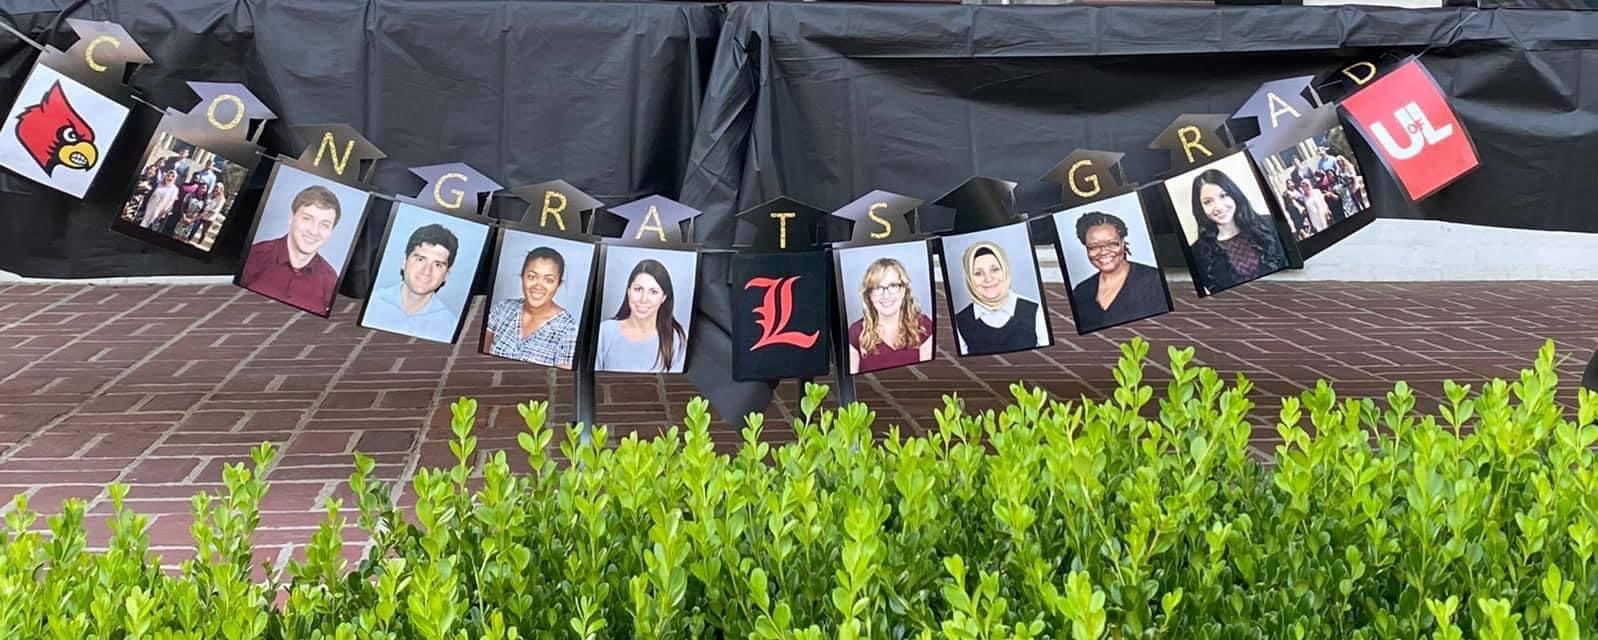 congrats grad banner with pictures of all graduating or exiting residents.